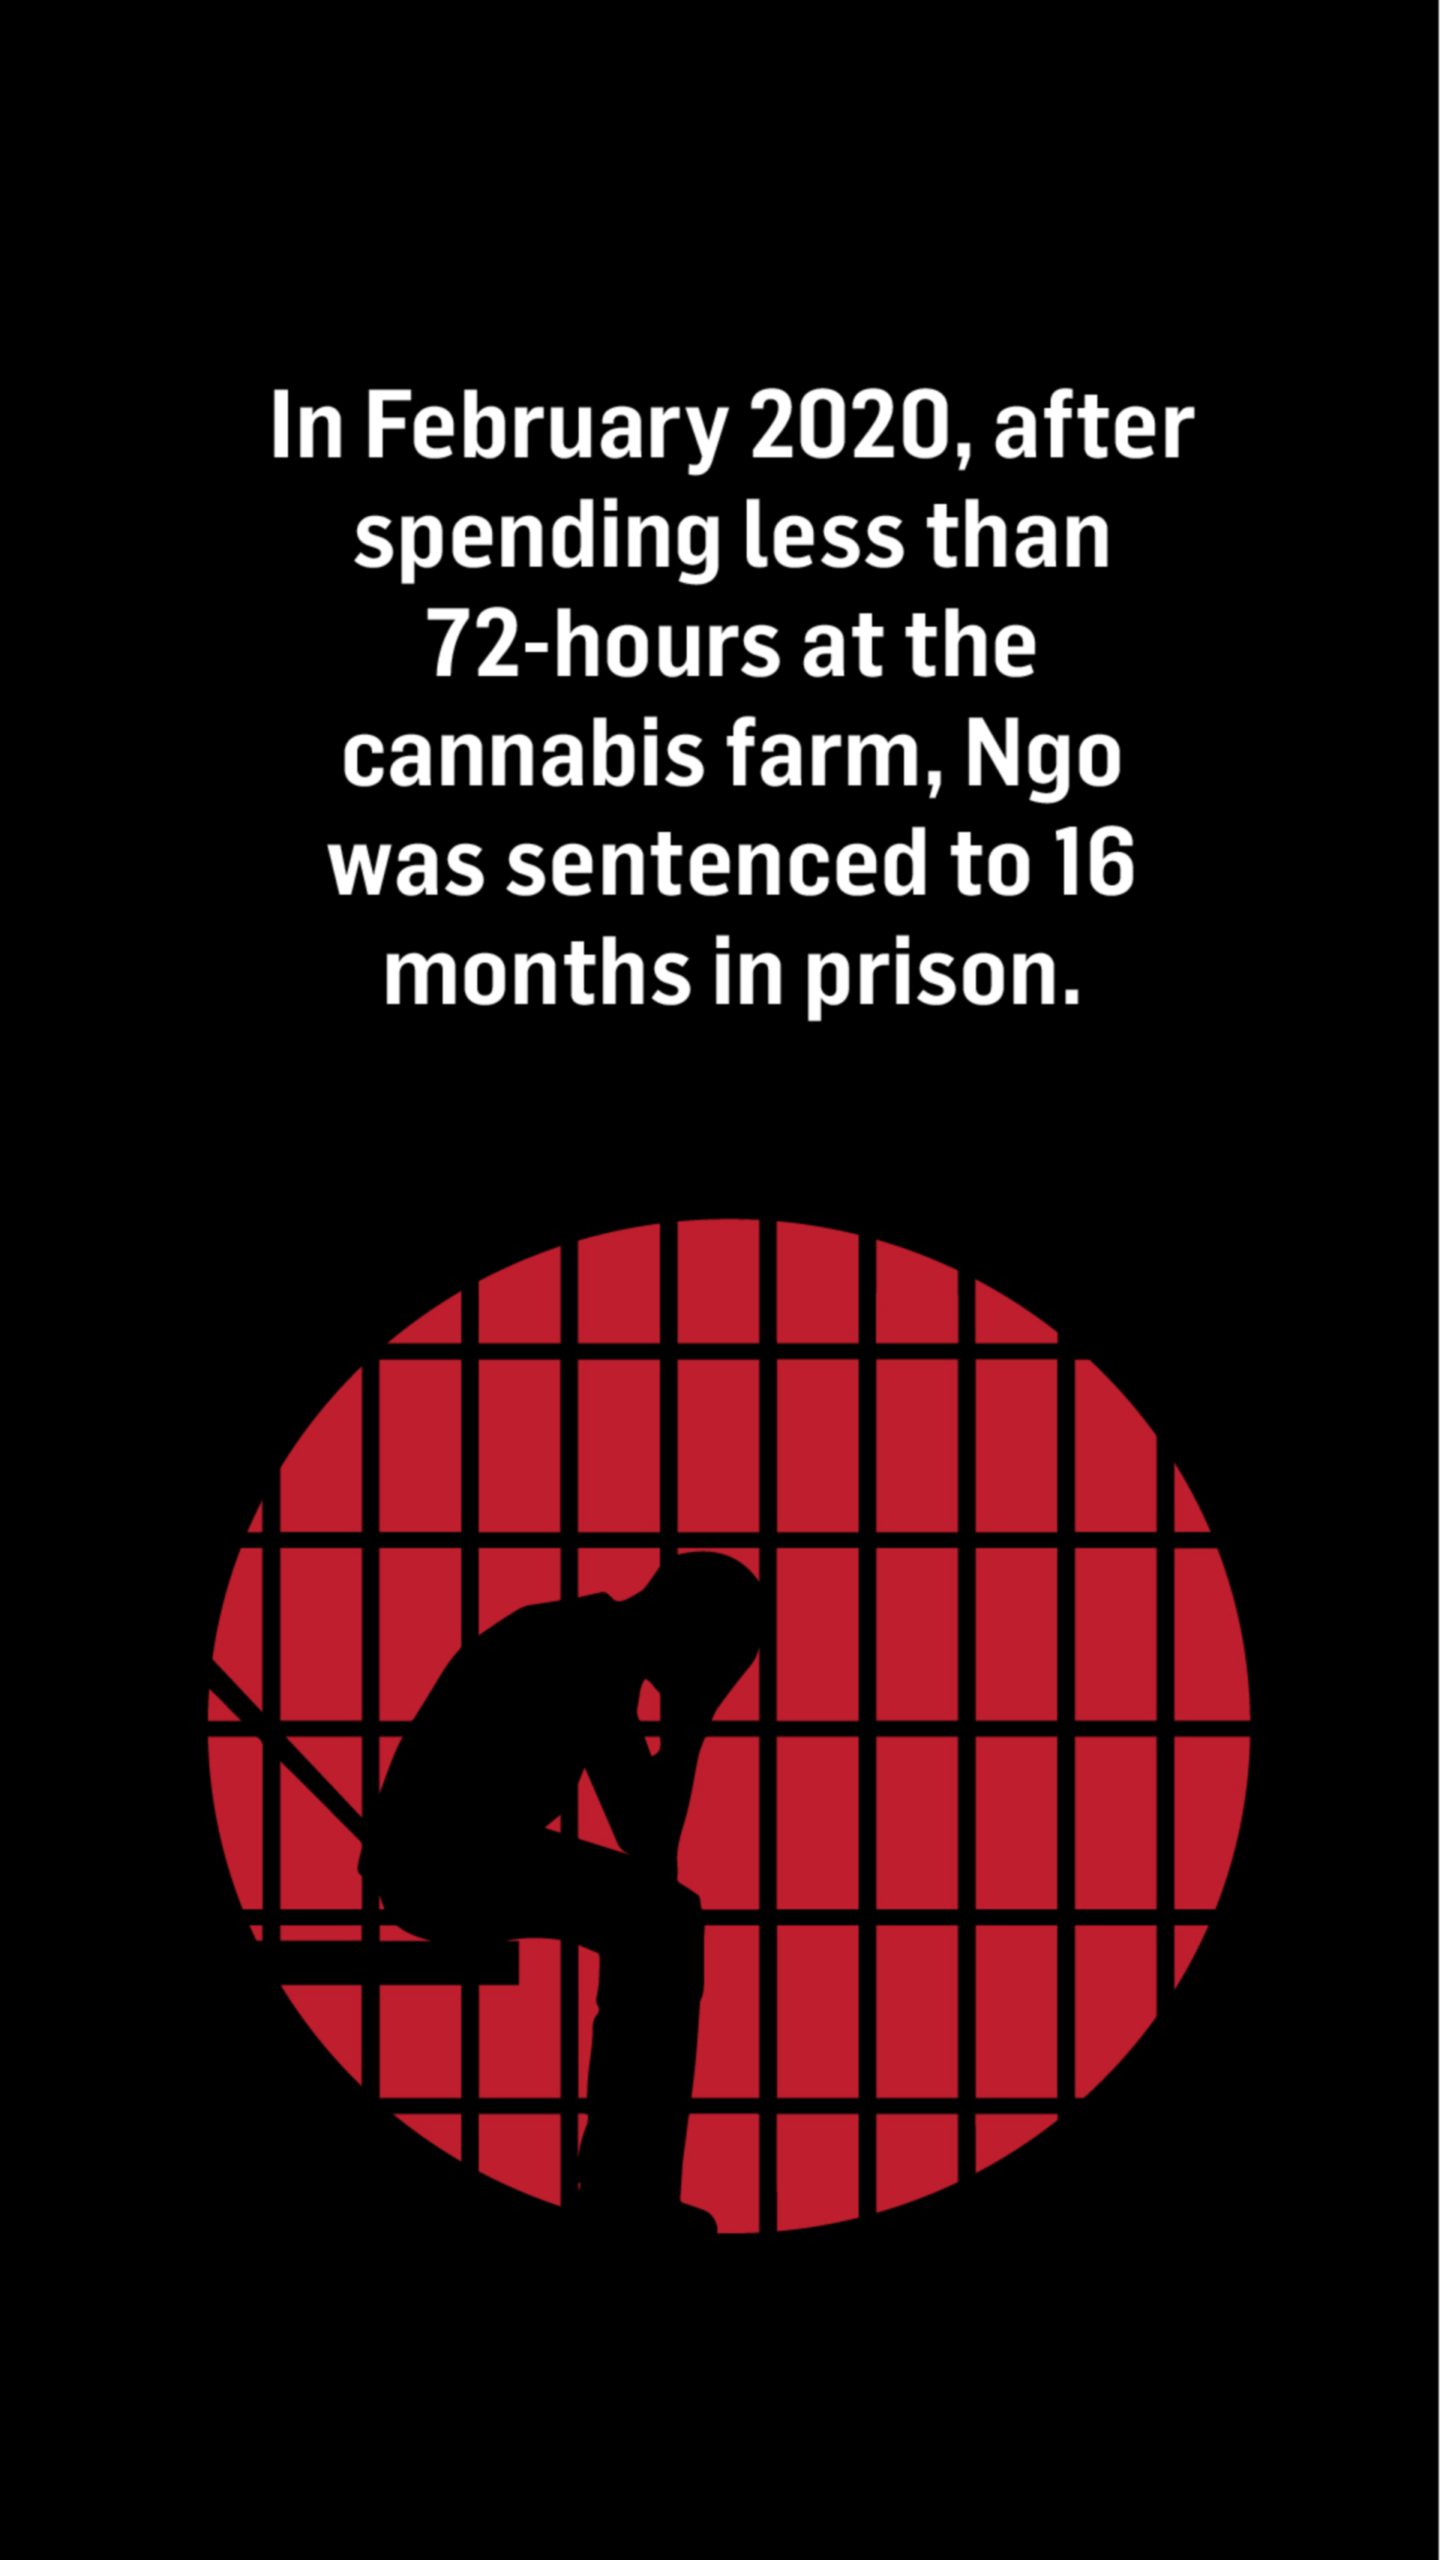 The silhouette of a man sitting in a prison cell with his head in his hands. Above the image, the text reads: In February 2020, after spending less than 72 hours at the cannabis farm, Ngo was sentenced to 16 months in prison.